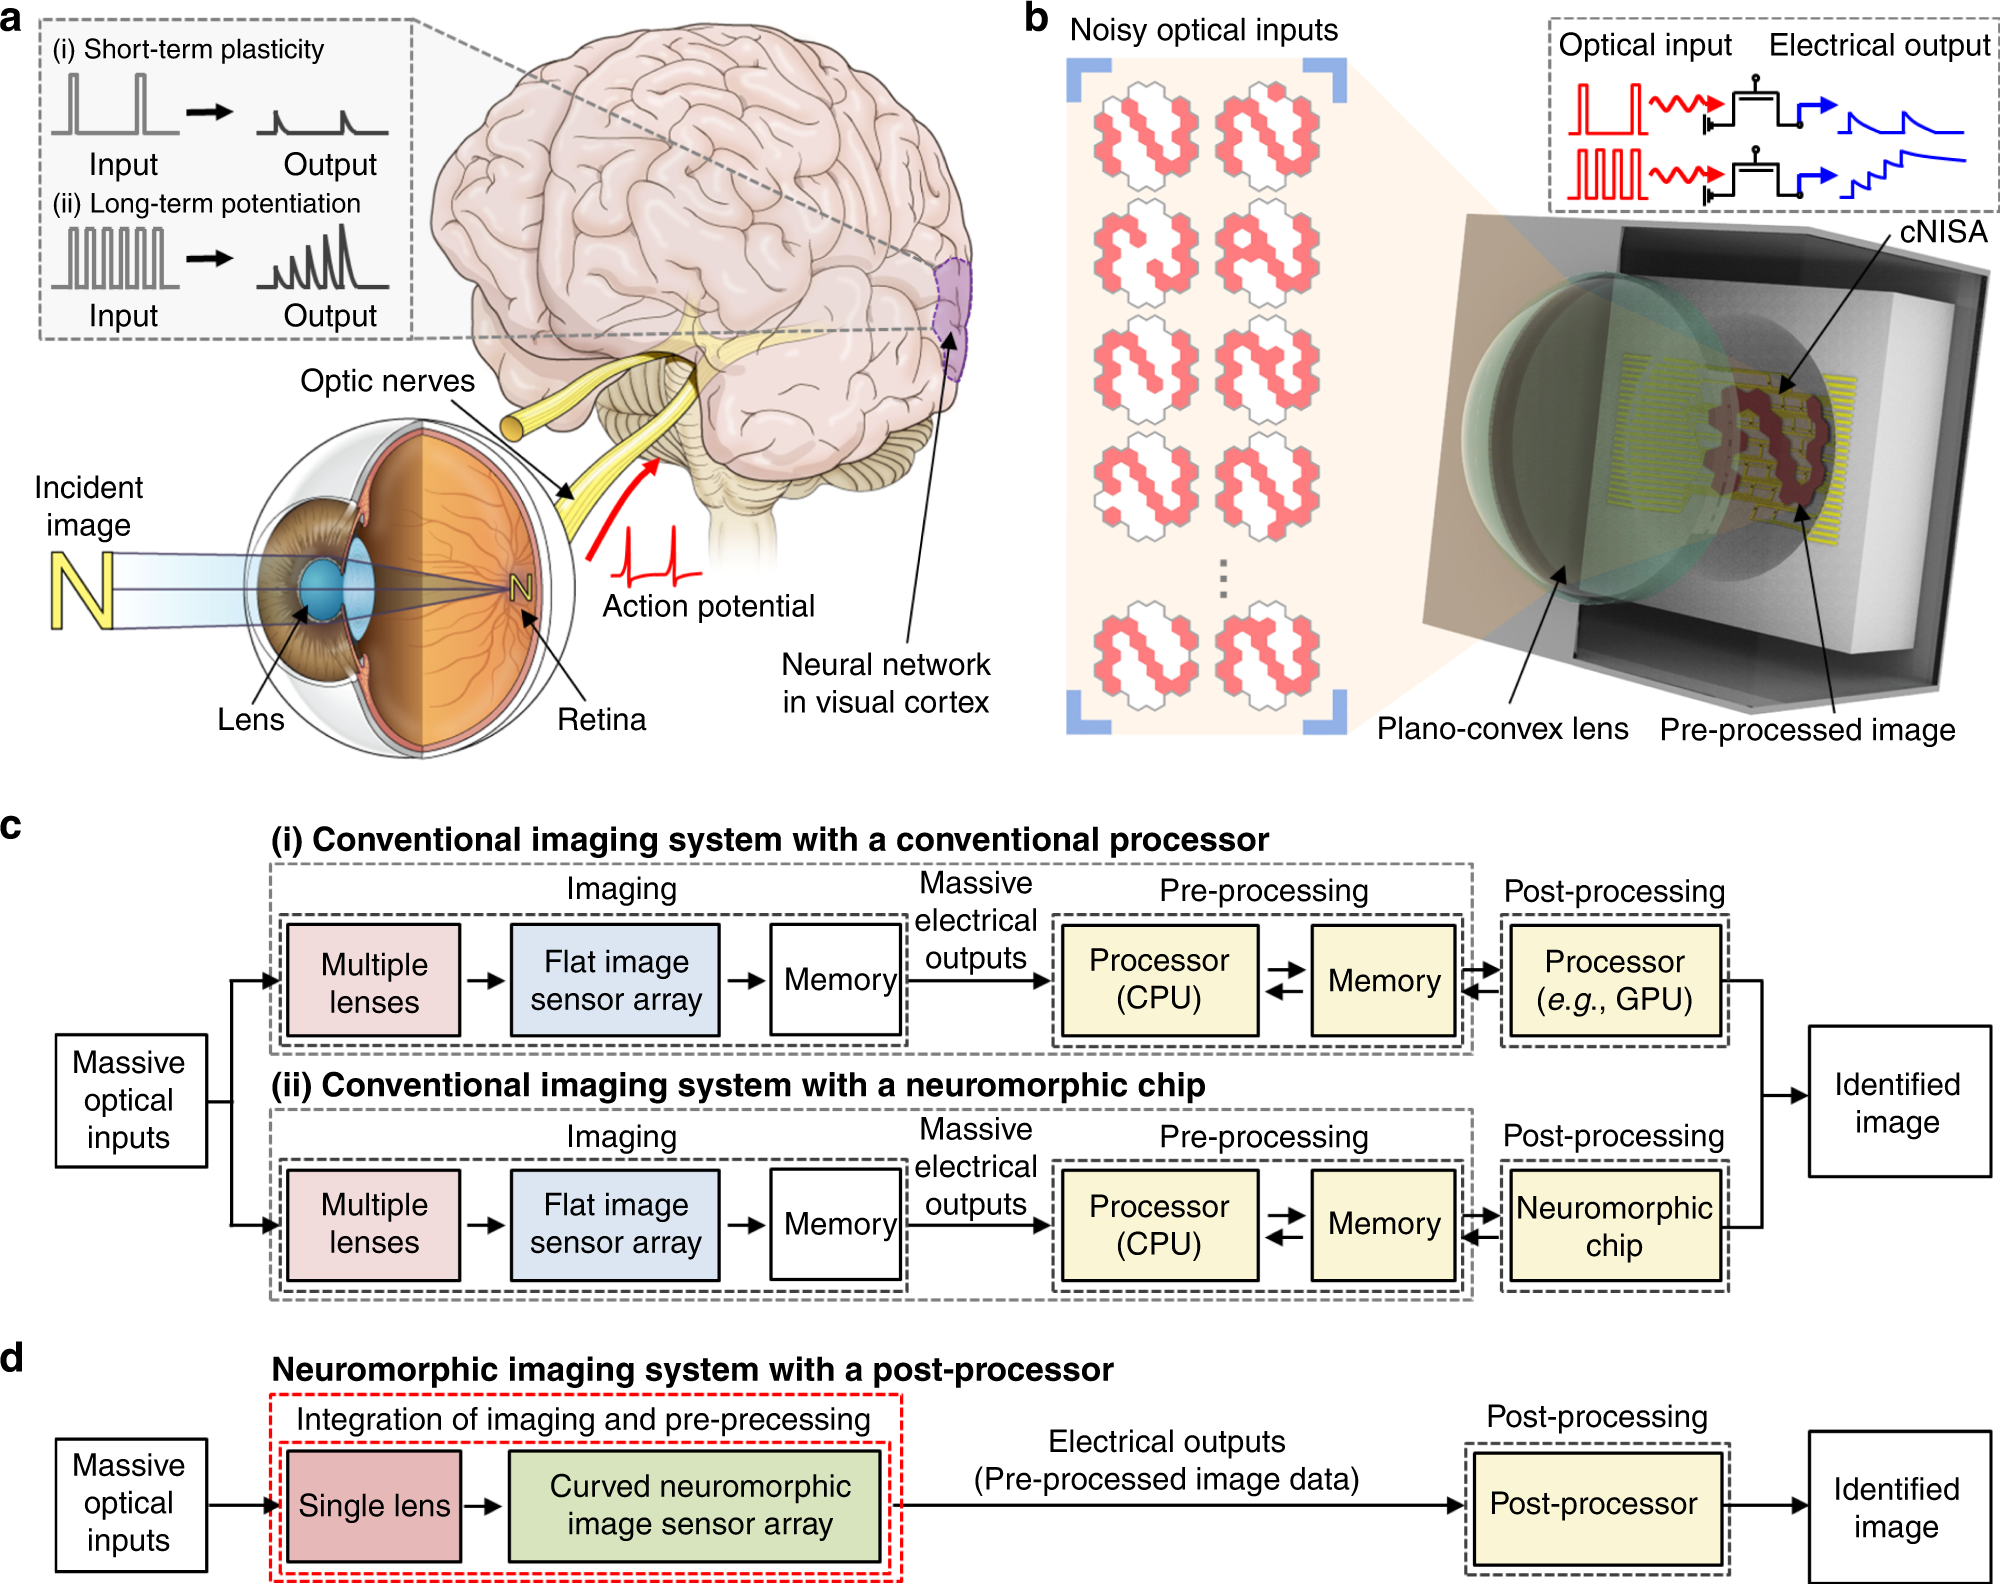 Panter Snooze onder Curved neuromorphic image sensor array using a MoS2-organic heterostructure  inspired by the human visual recognition system | Nature Communications